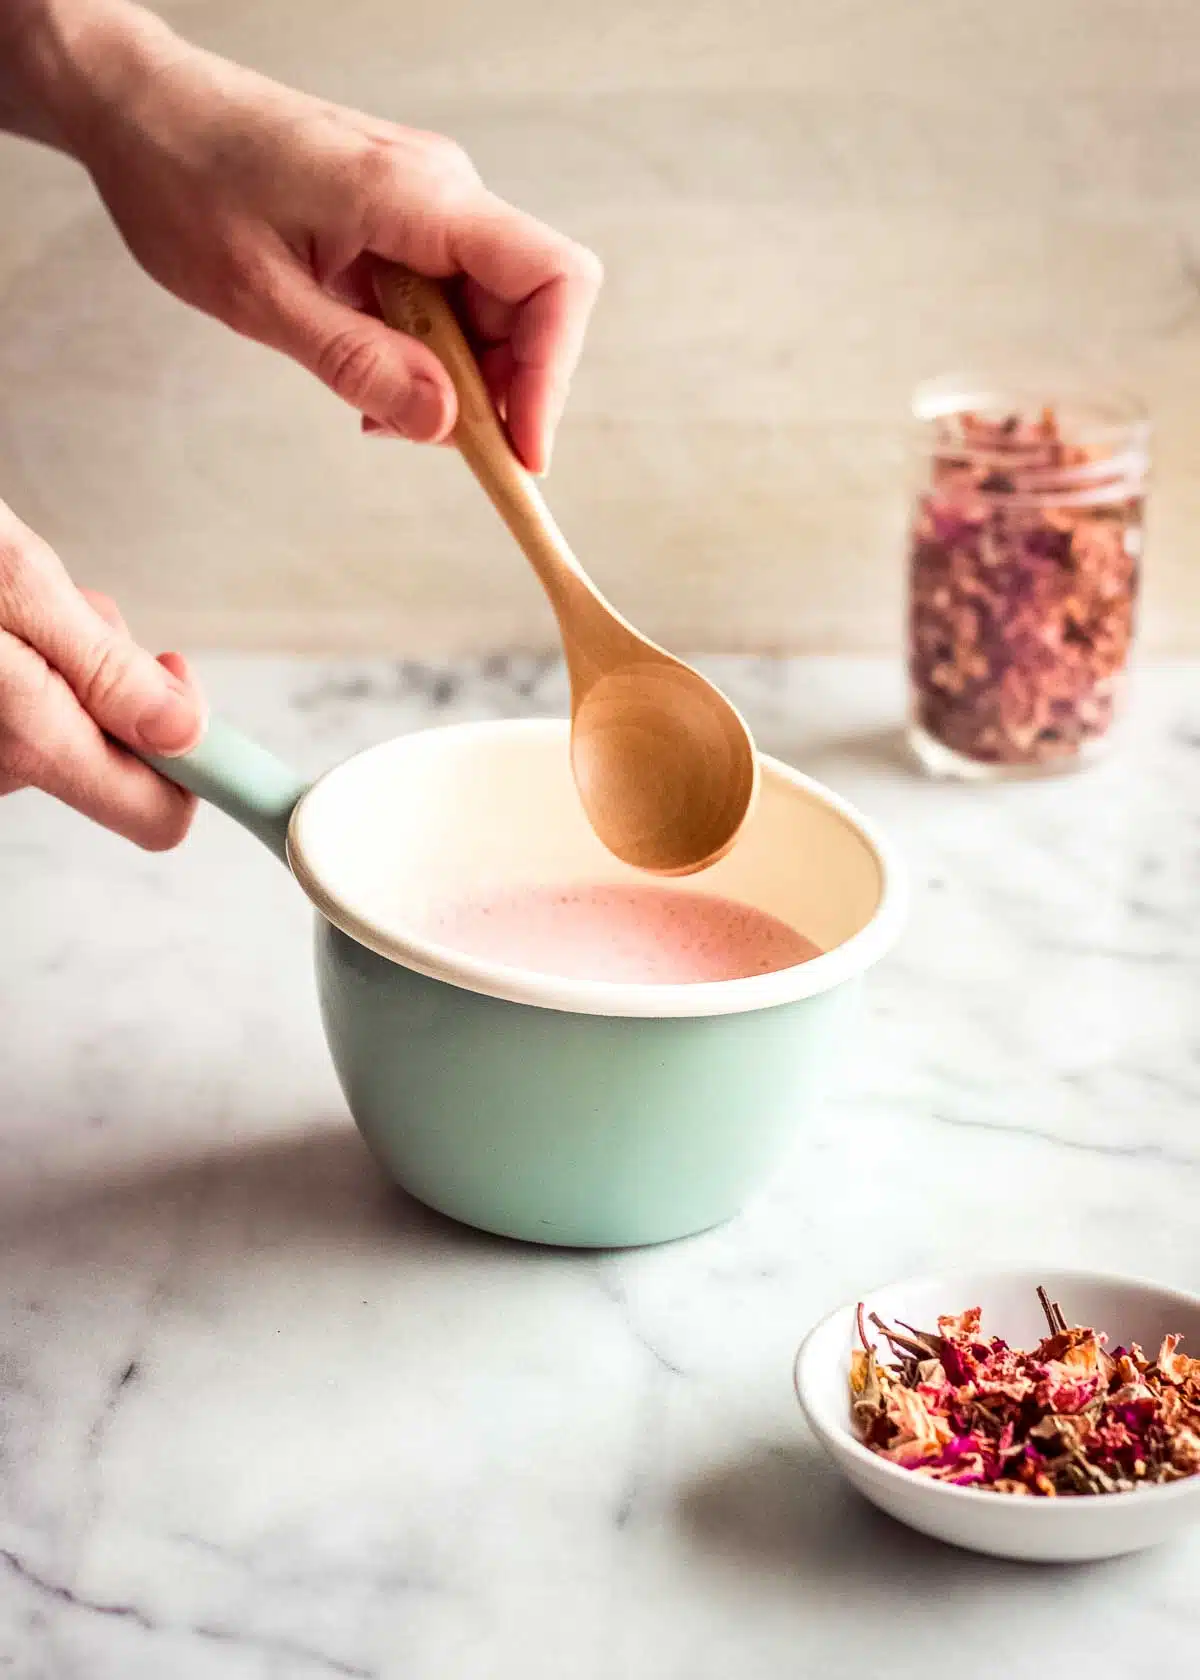 A woman's hand is stirring rose latte ingredients in a turquoise pan, surrounded by containers of rose petals.